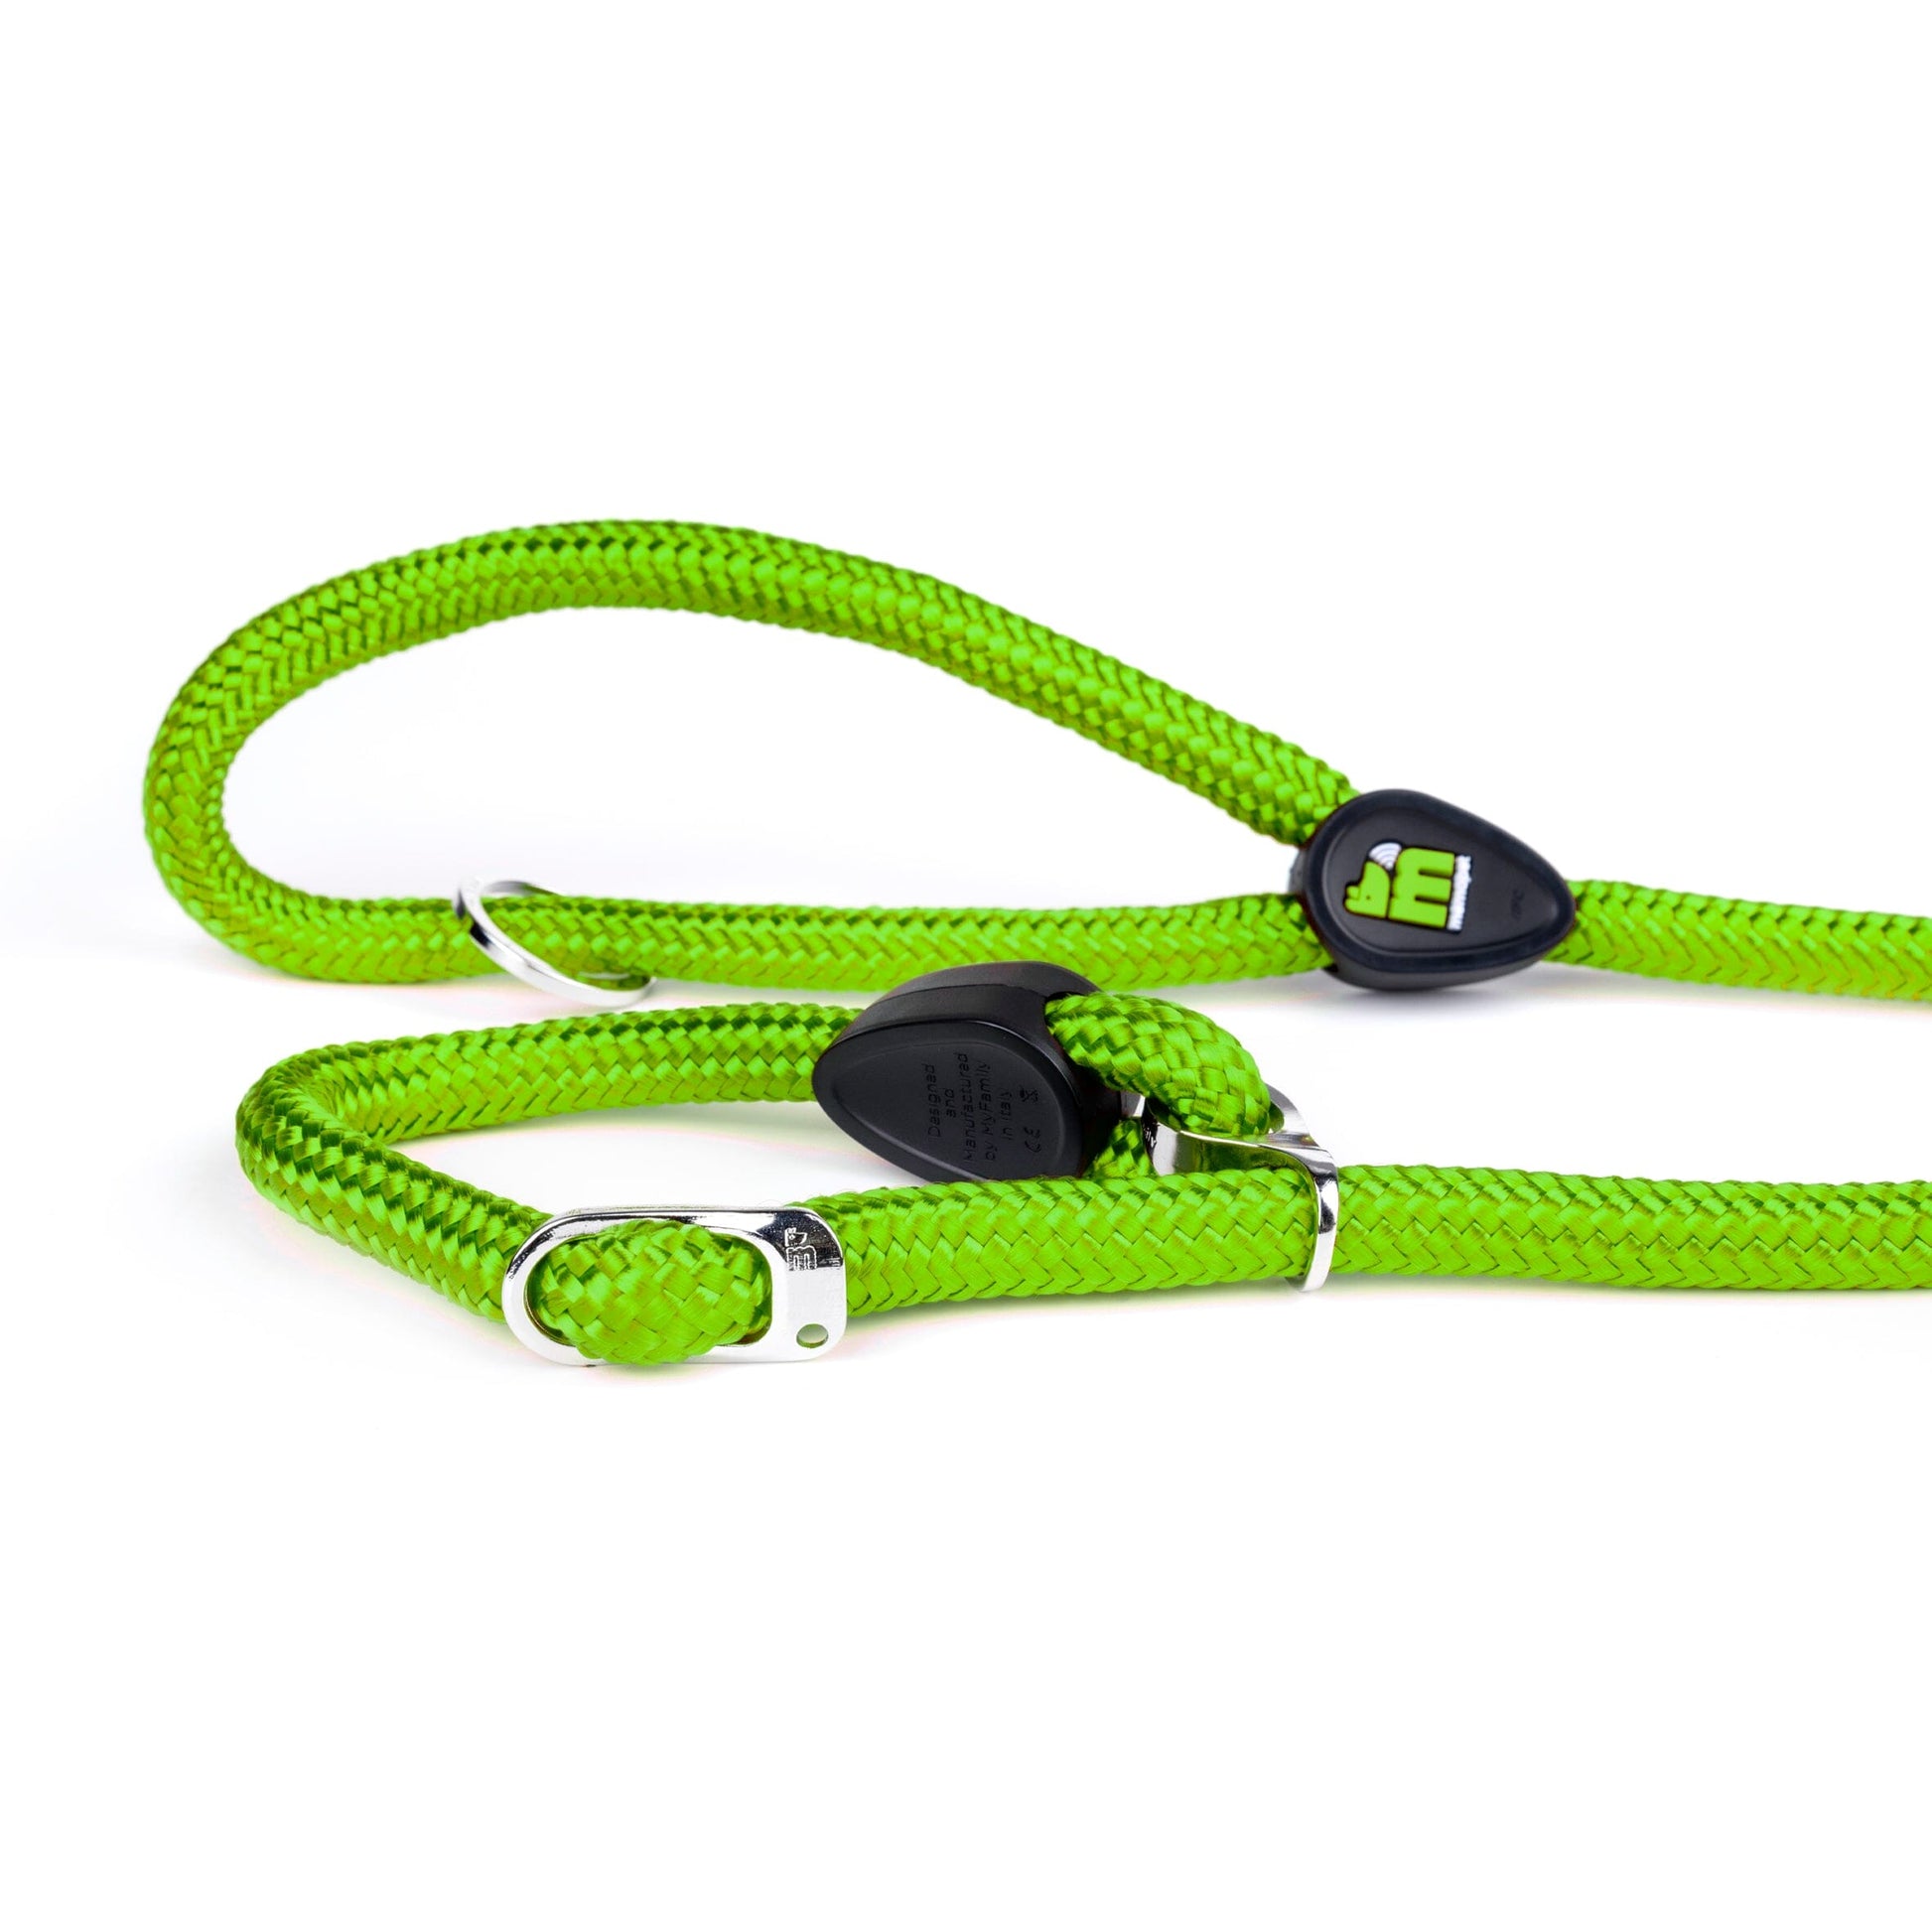 Memopet Dog Training Collar and Rope Leash 2in1 With Activity Tracking Device and Digital ID Pet Supplies My Family Medium Green 